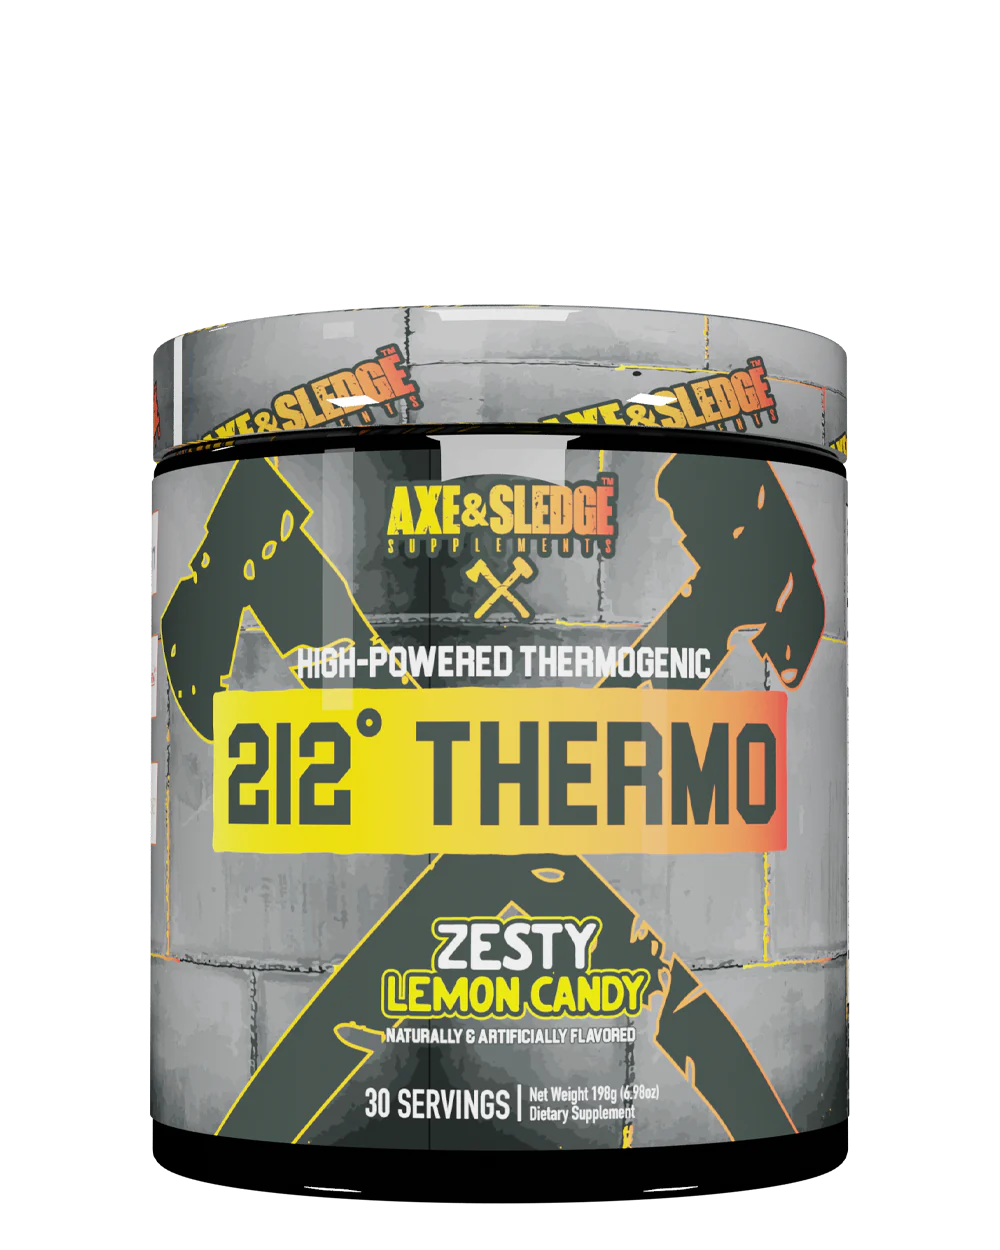 212° THERMO // POWDERED THERMOGENIC 30 Serv